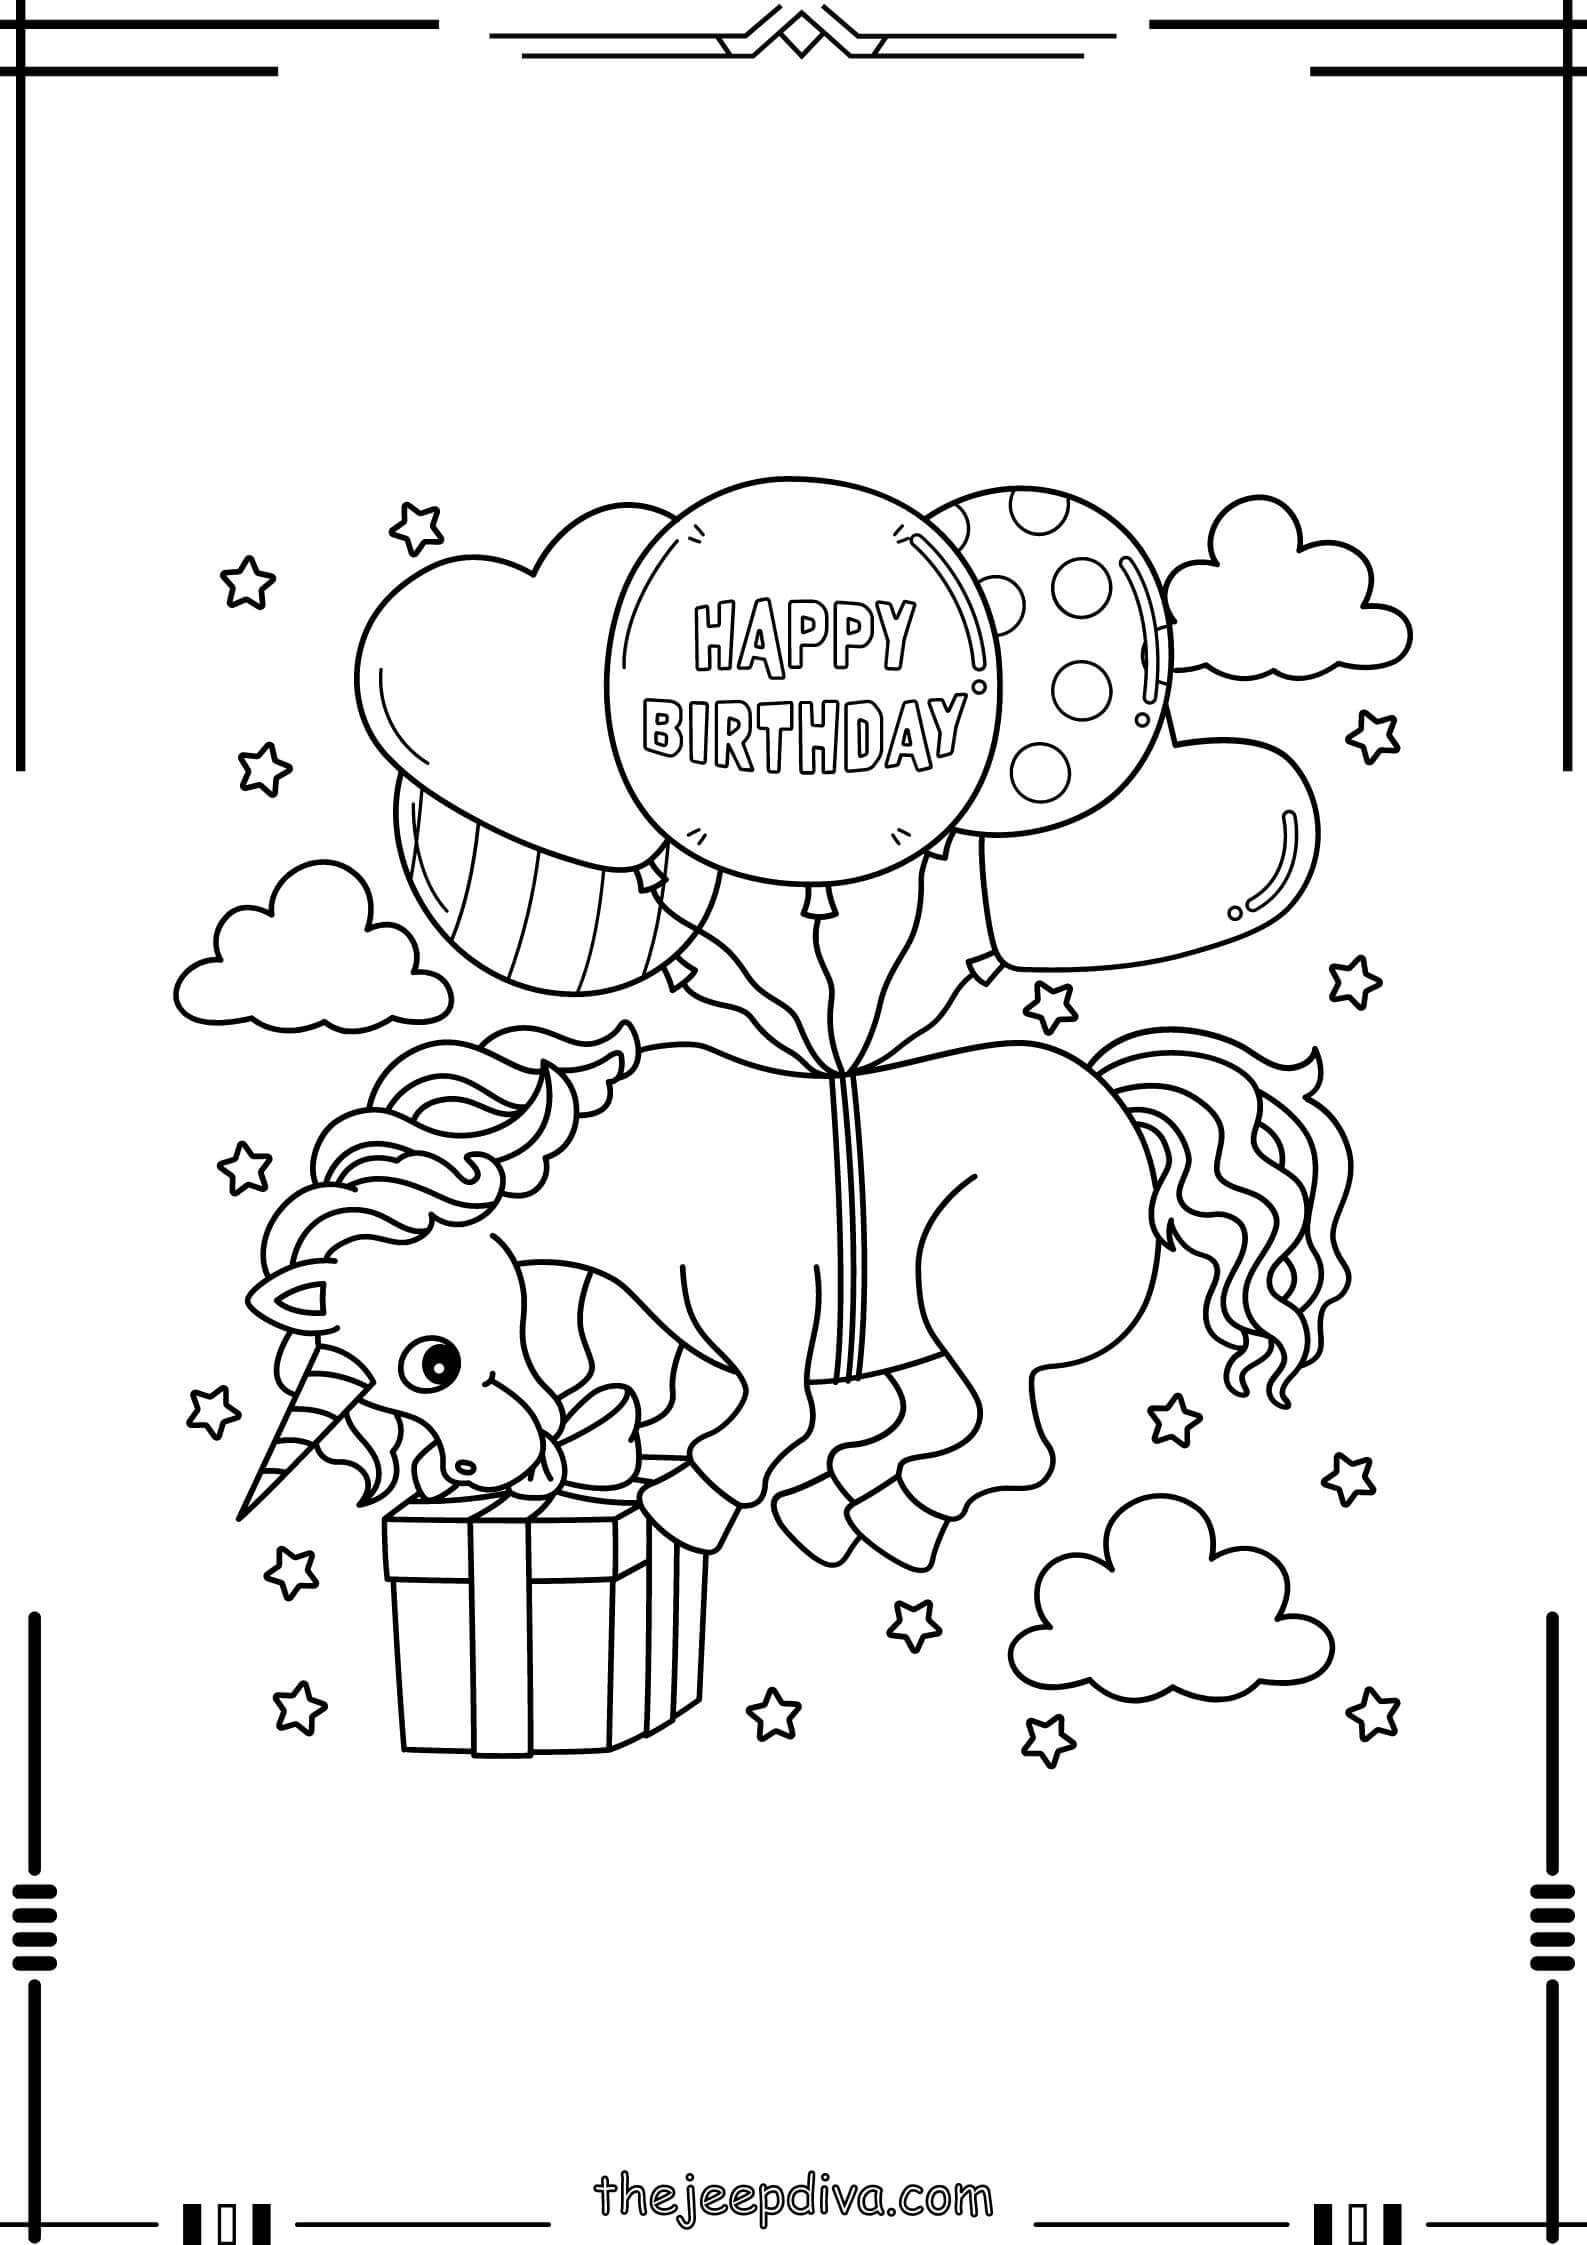 unicorn-coloring-page-easy-23